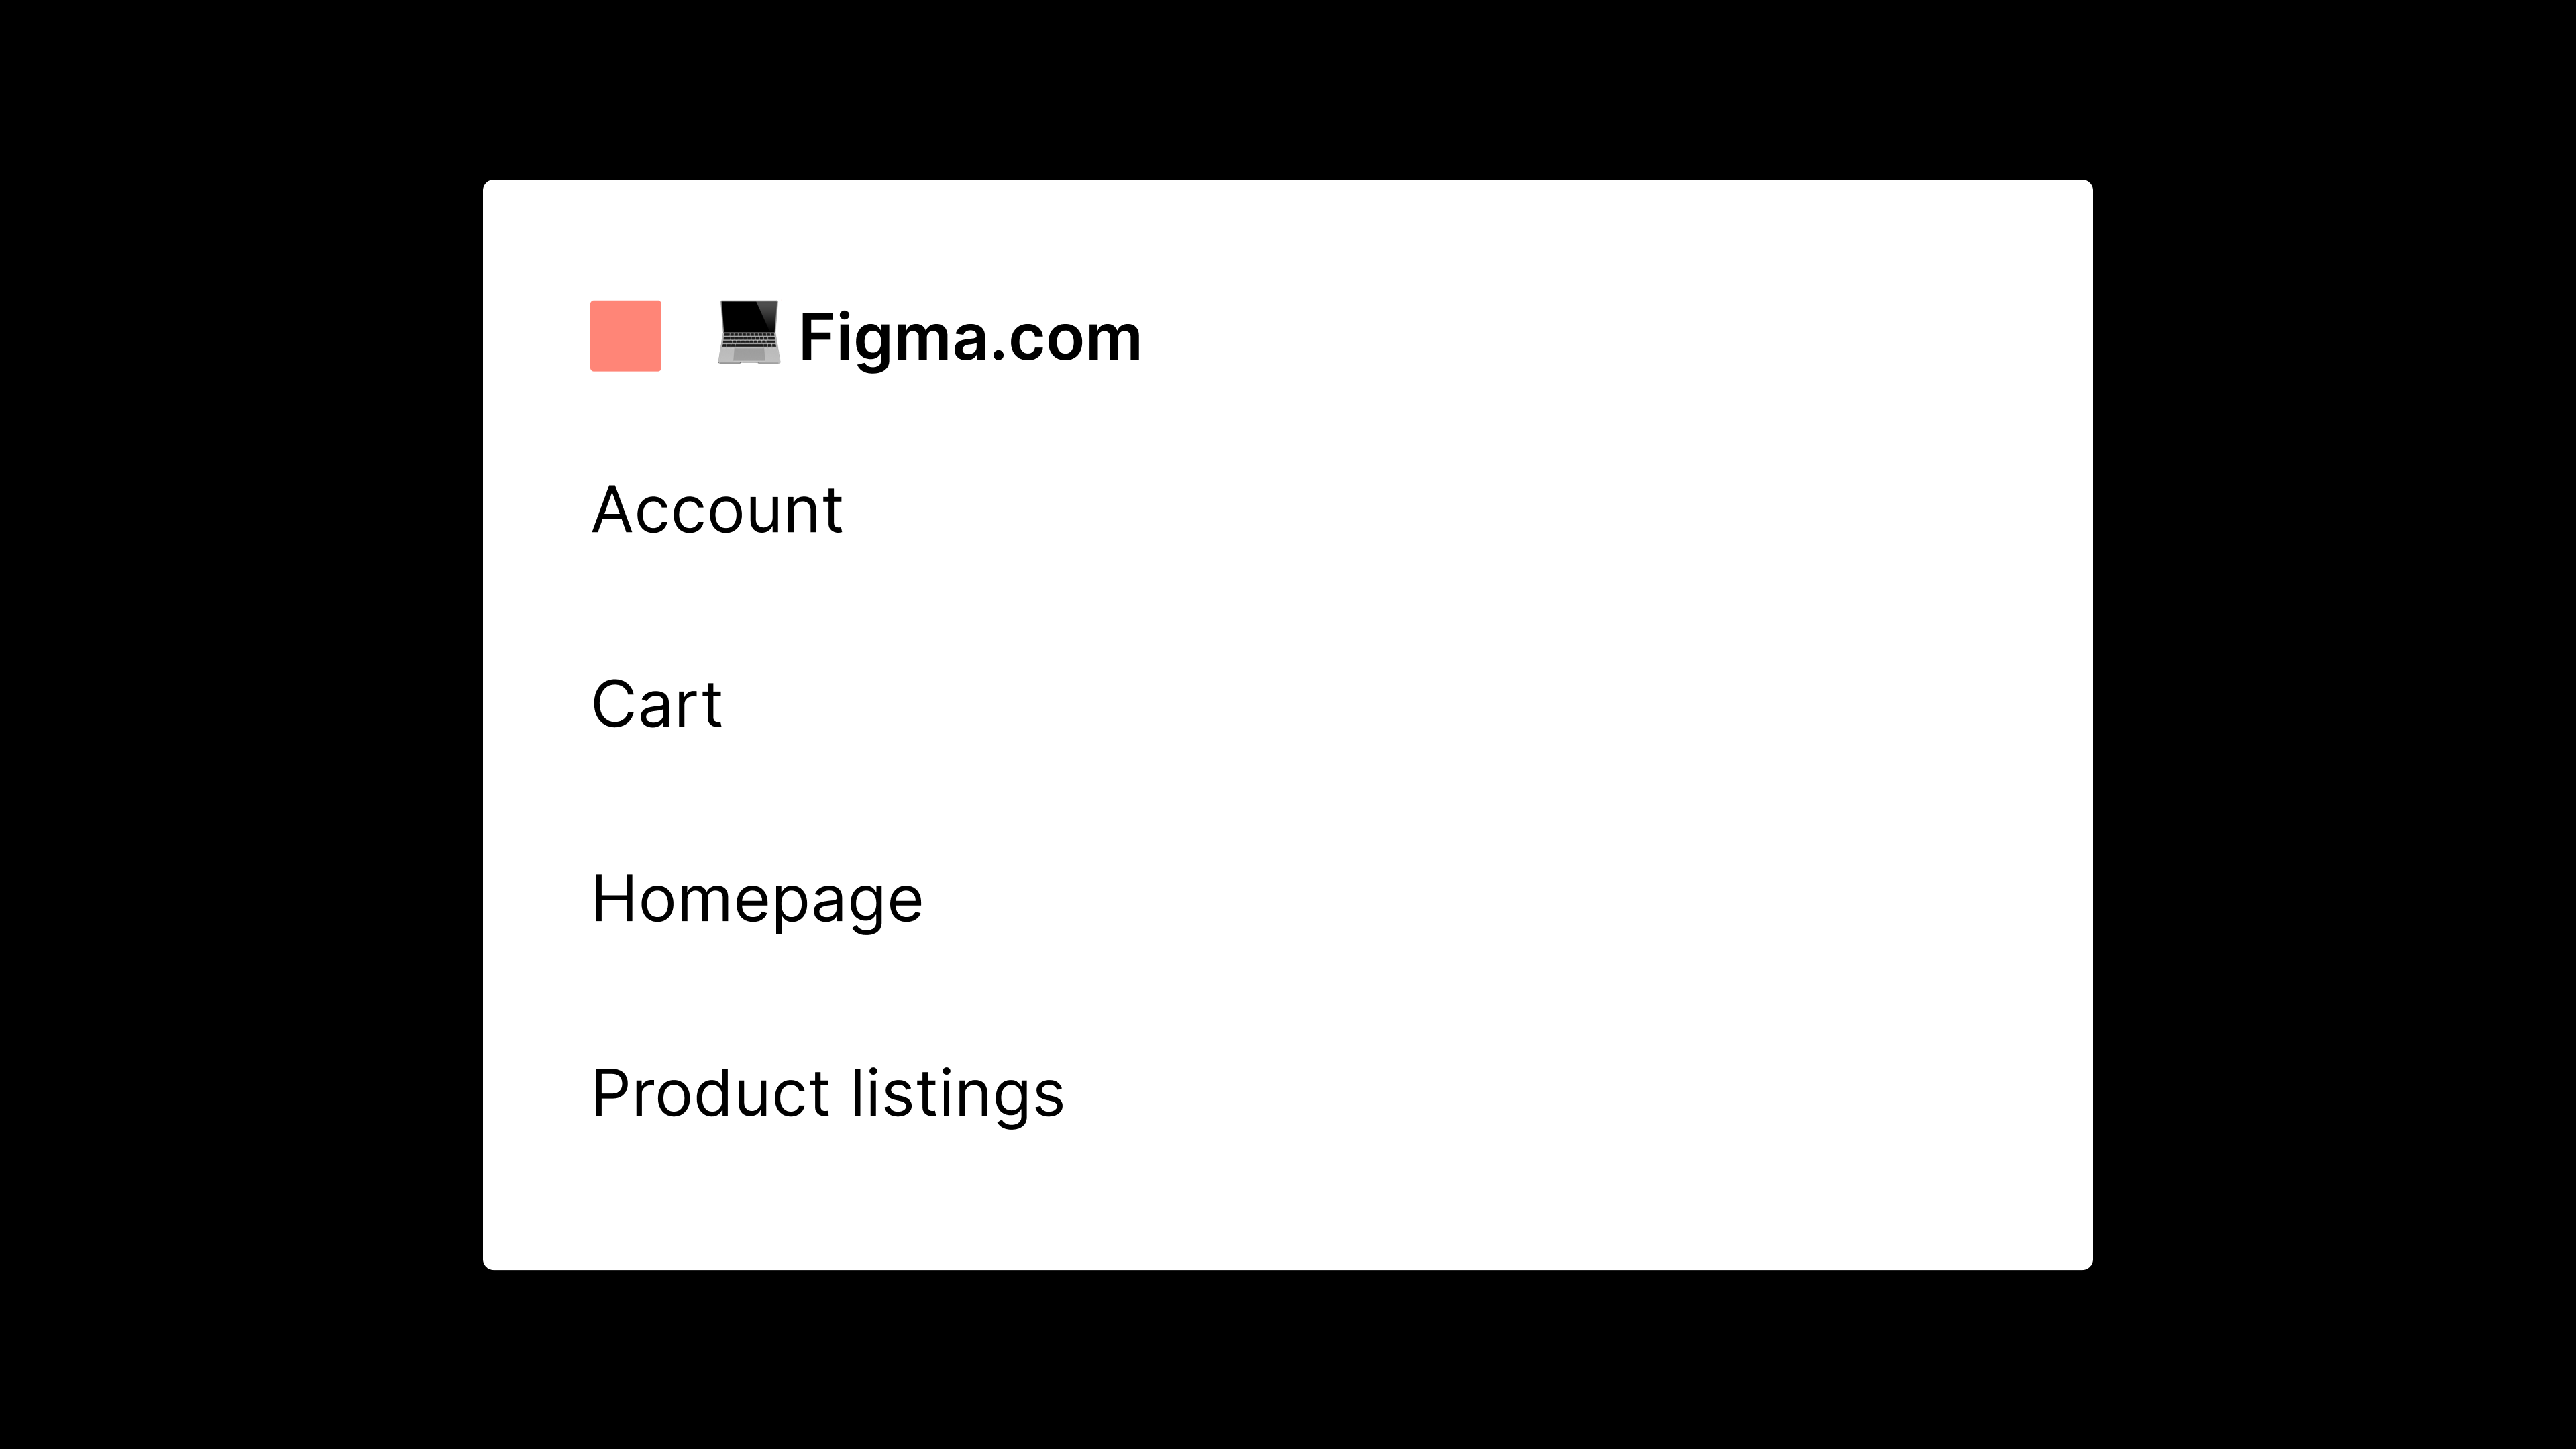 A mockup showing a Figma team and project arrangement. The team is called "Figma," and the projects are "Account," "Cart," "Homepage," "Product listings."